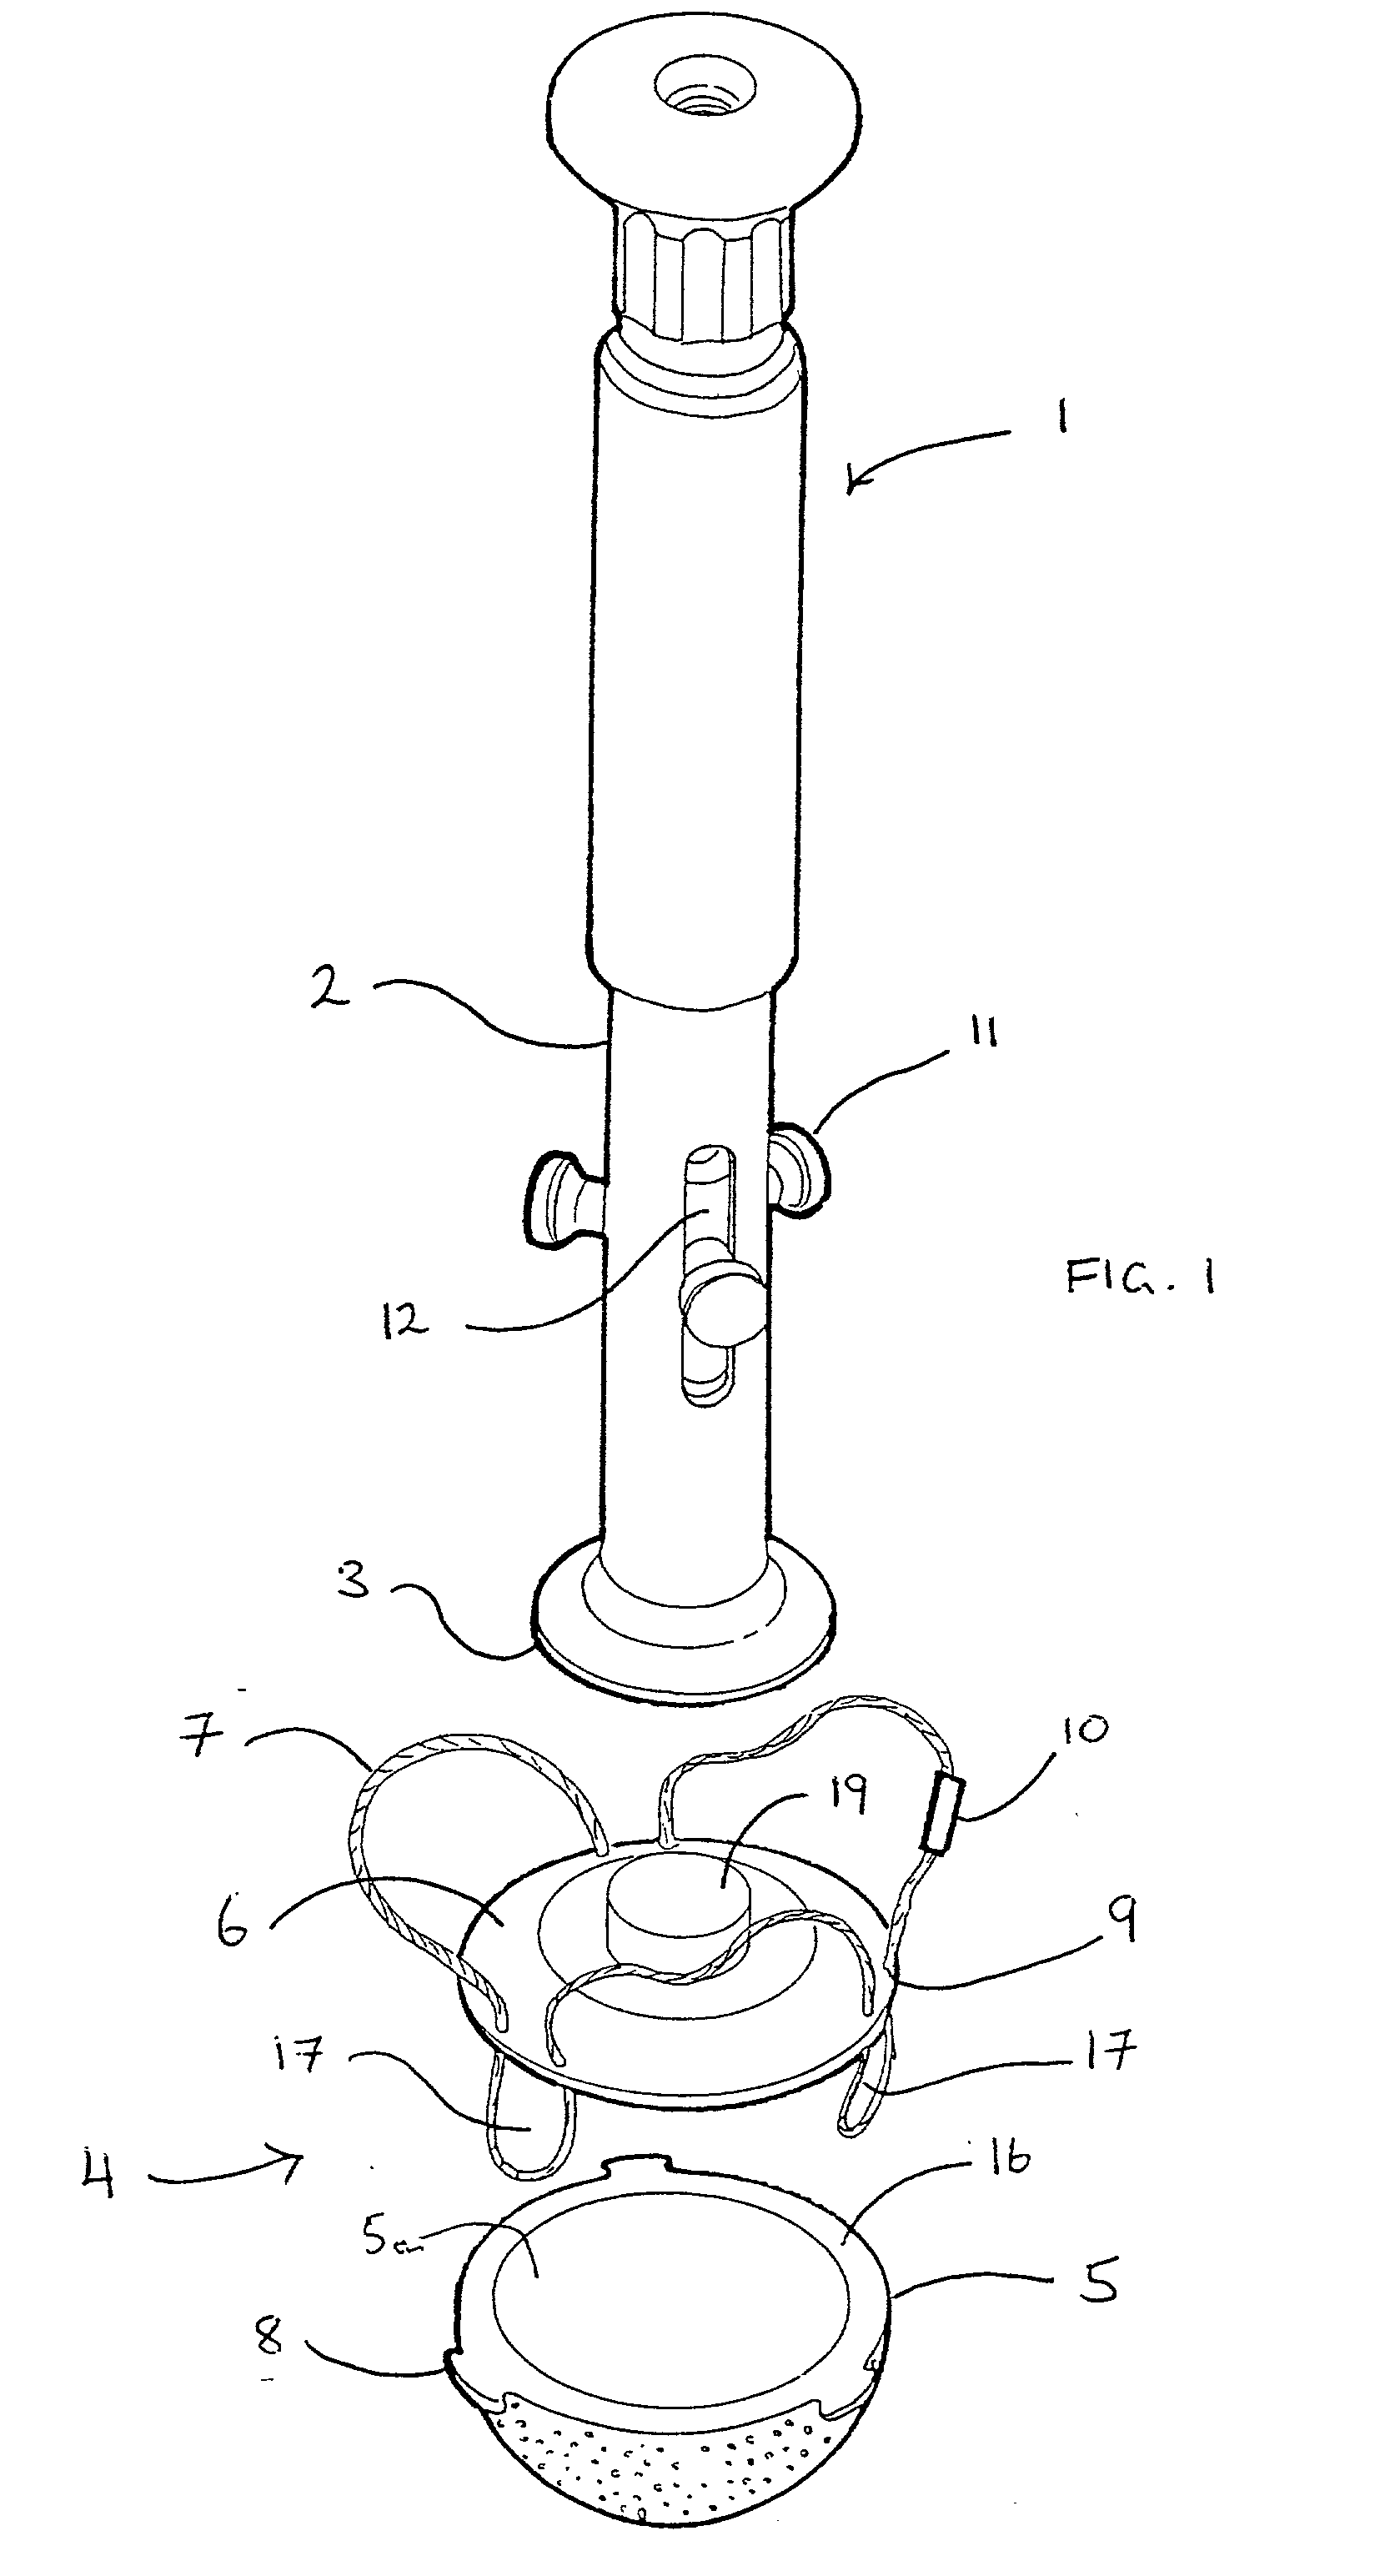 Prosthetic implant and surgical tool